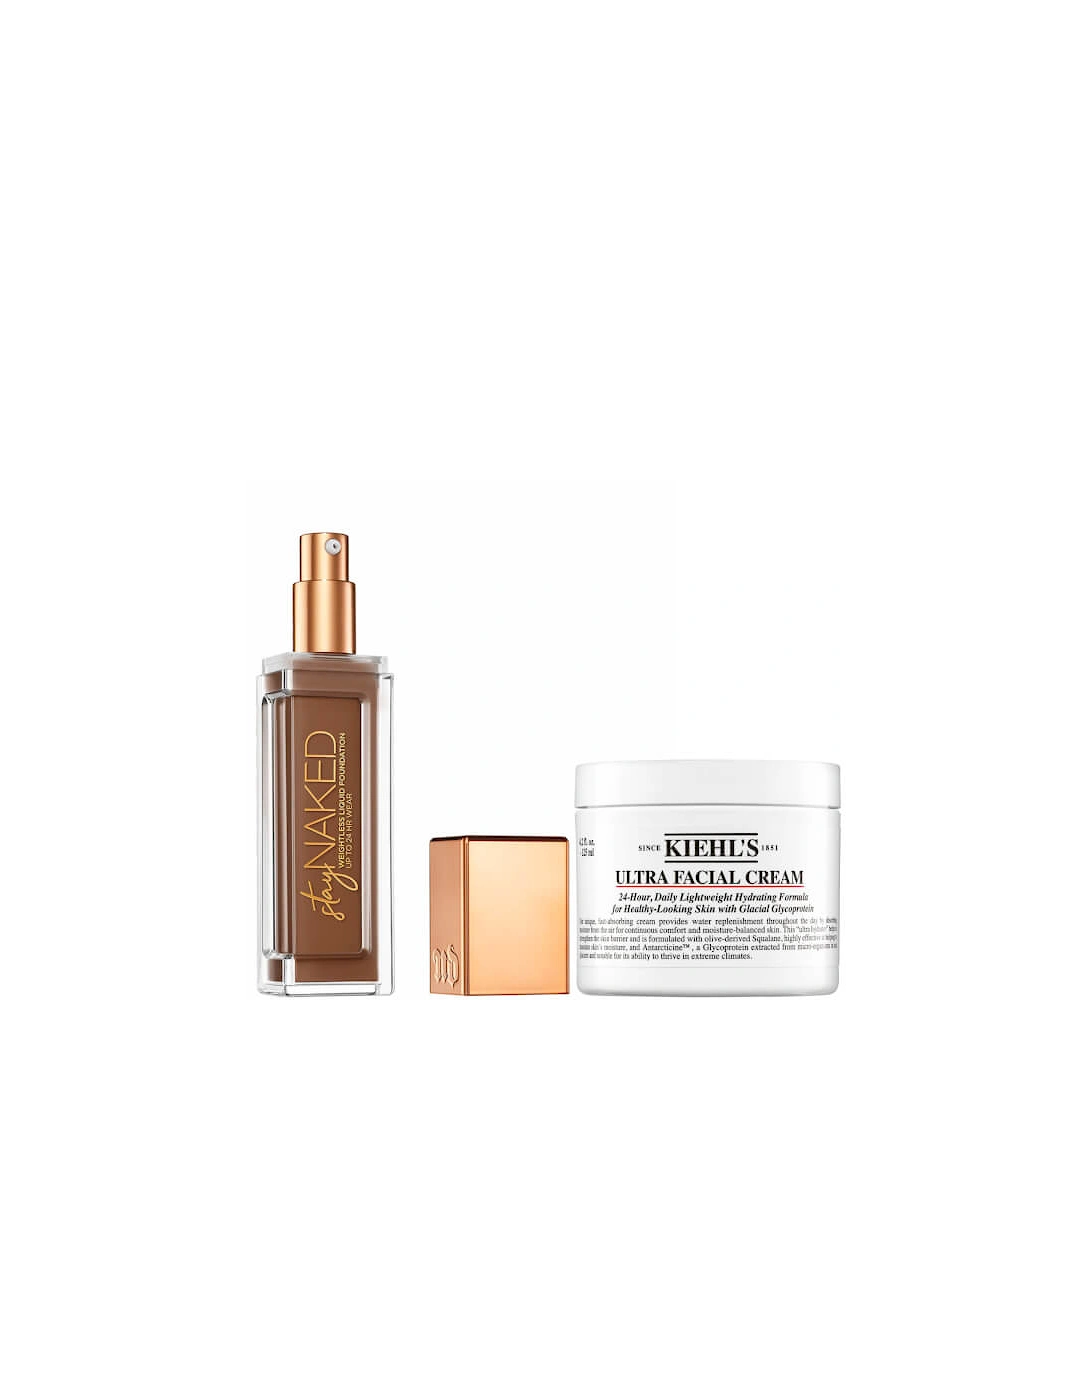 Stay Naked Foundation x Kiehl's Ultra Facial Cream 50ml Bundle - 70WR, 2 of 1